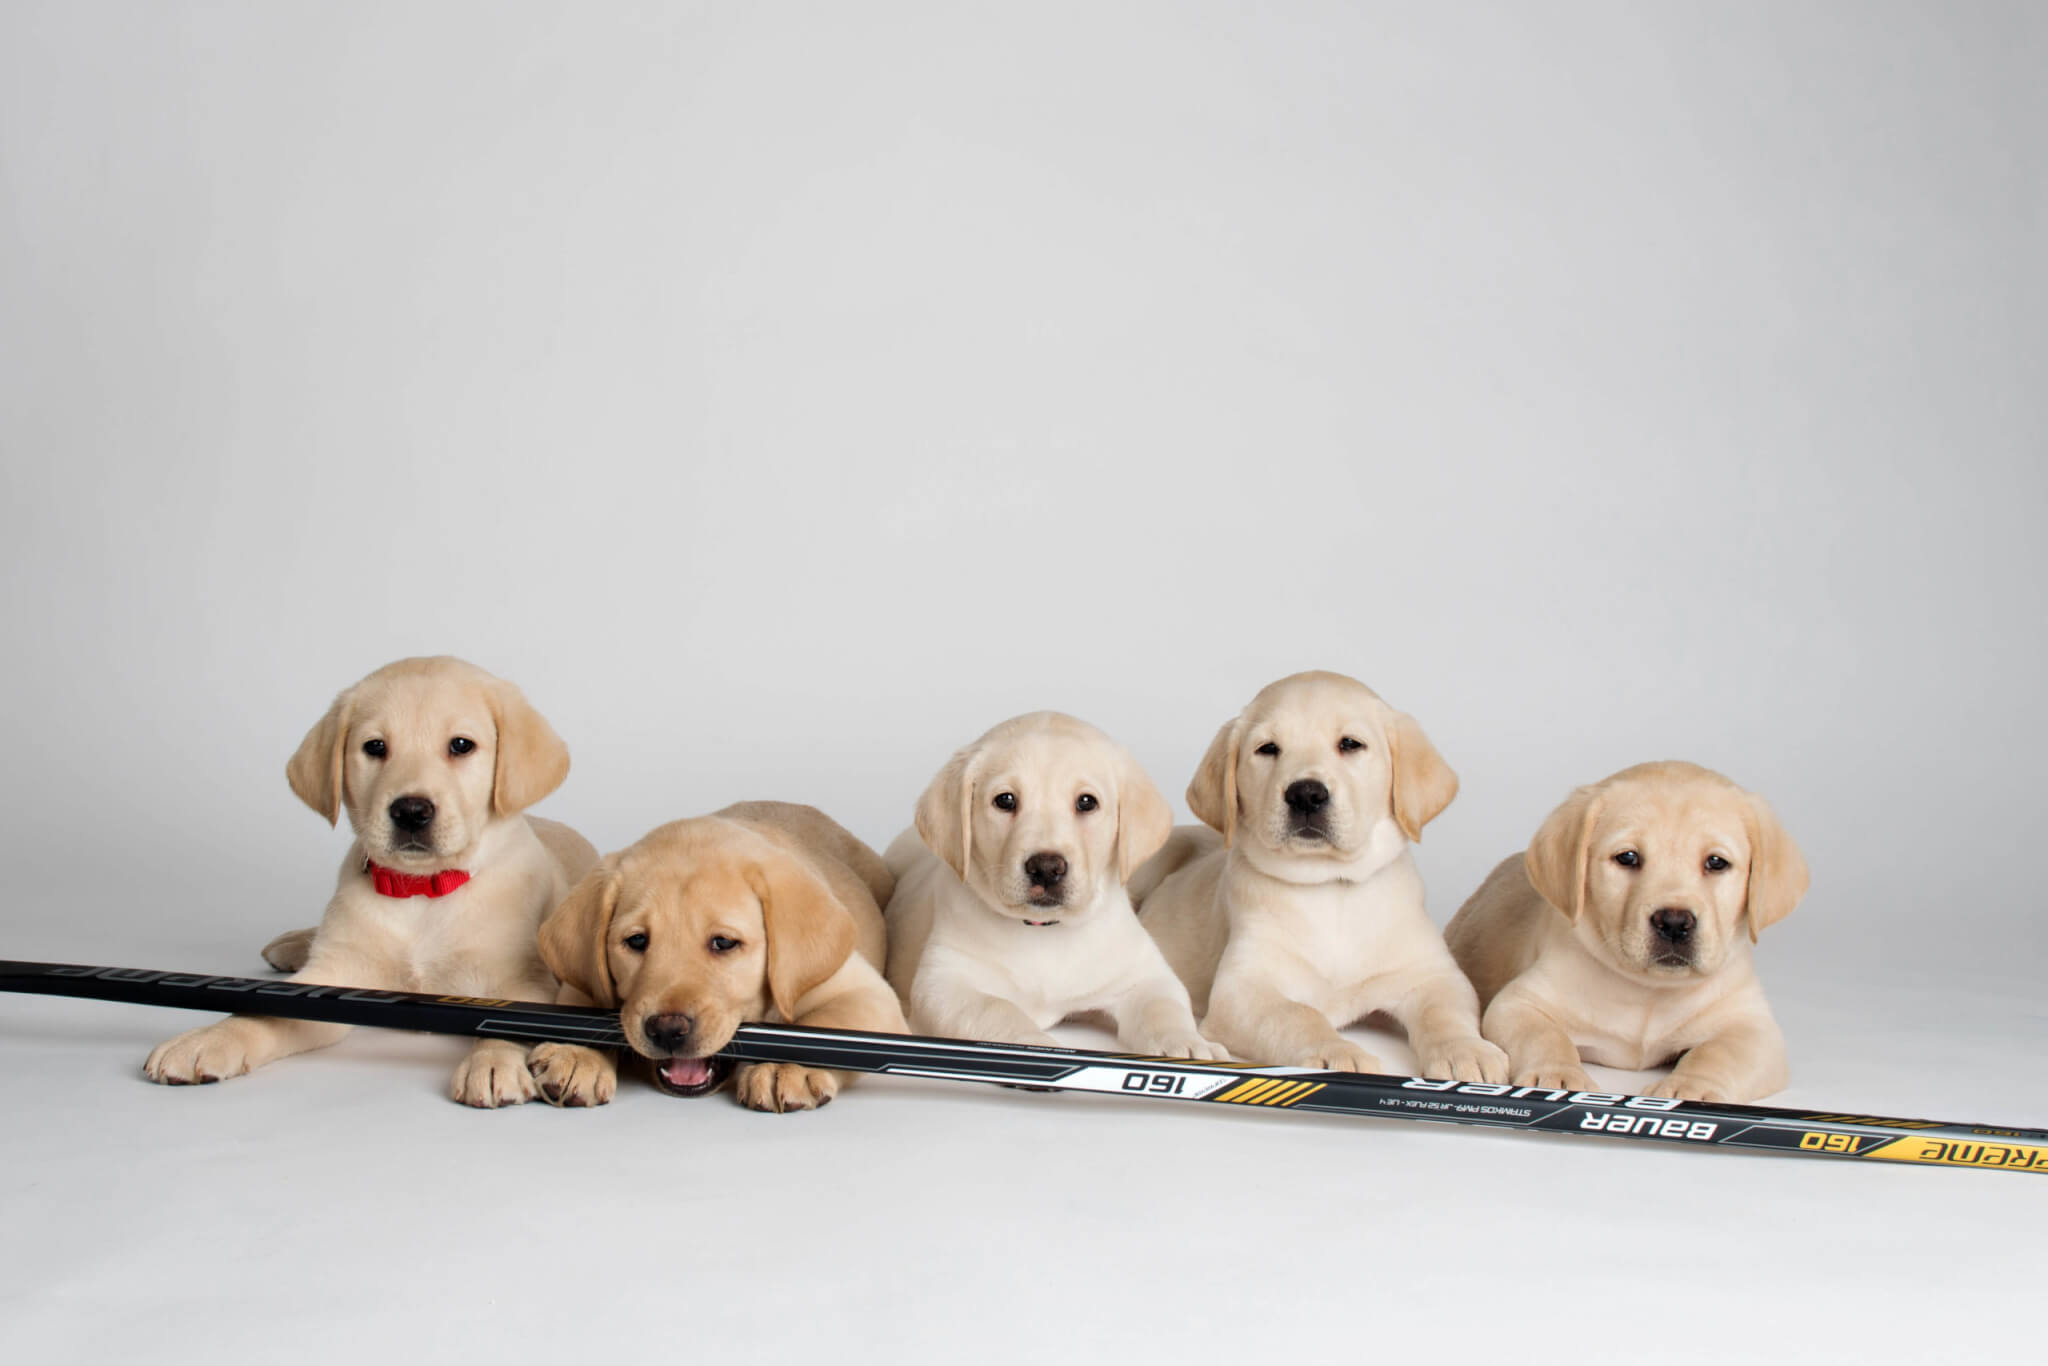 The Olympic Litter congratulates the US Women’s Hockey team on their incredible win.